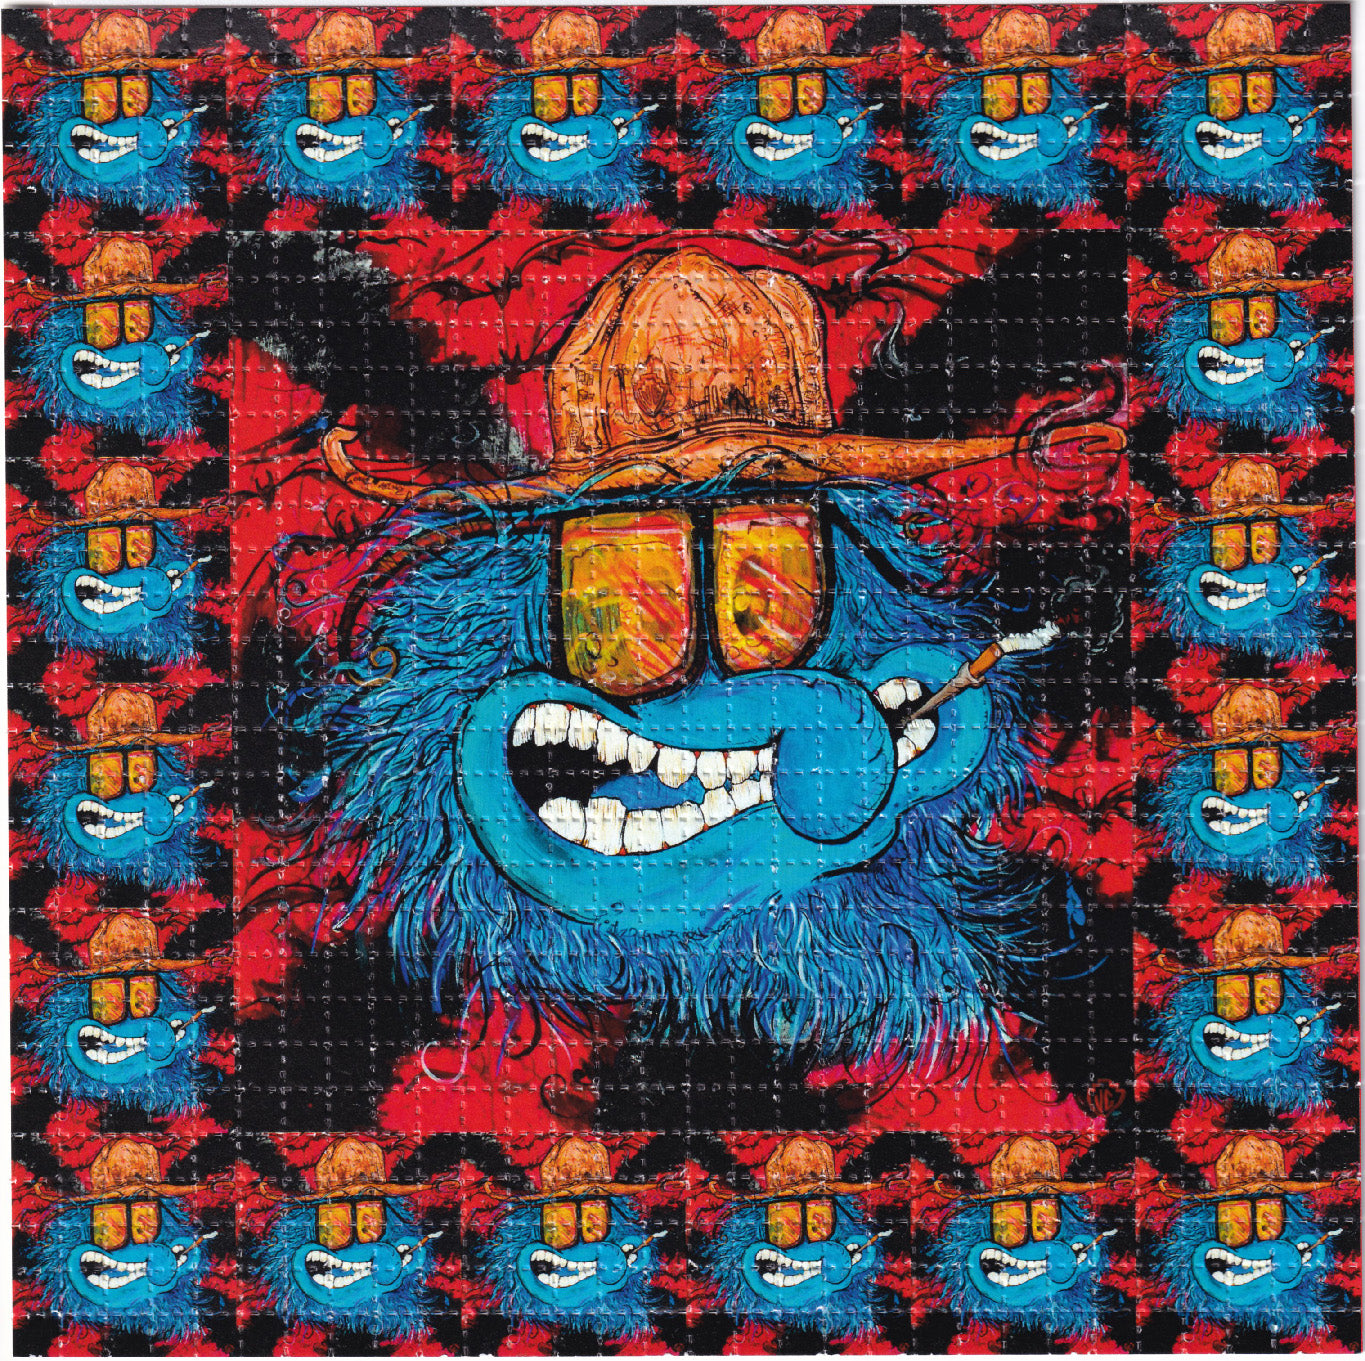 Gonzo Going Gonzo by Vincent Gordon SIGNED Limited Edition LSD blotter art print